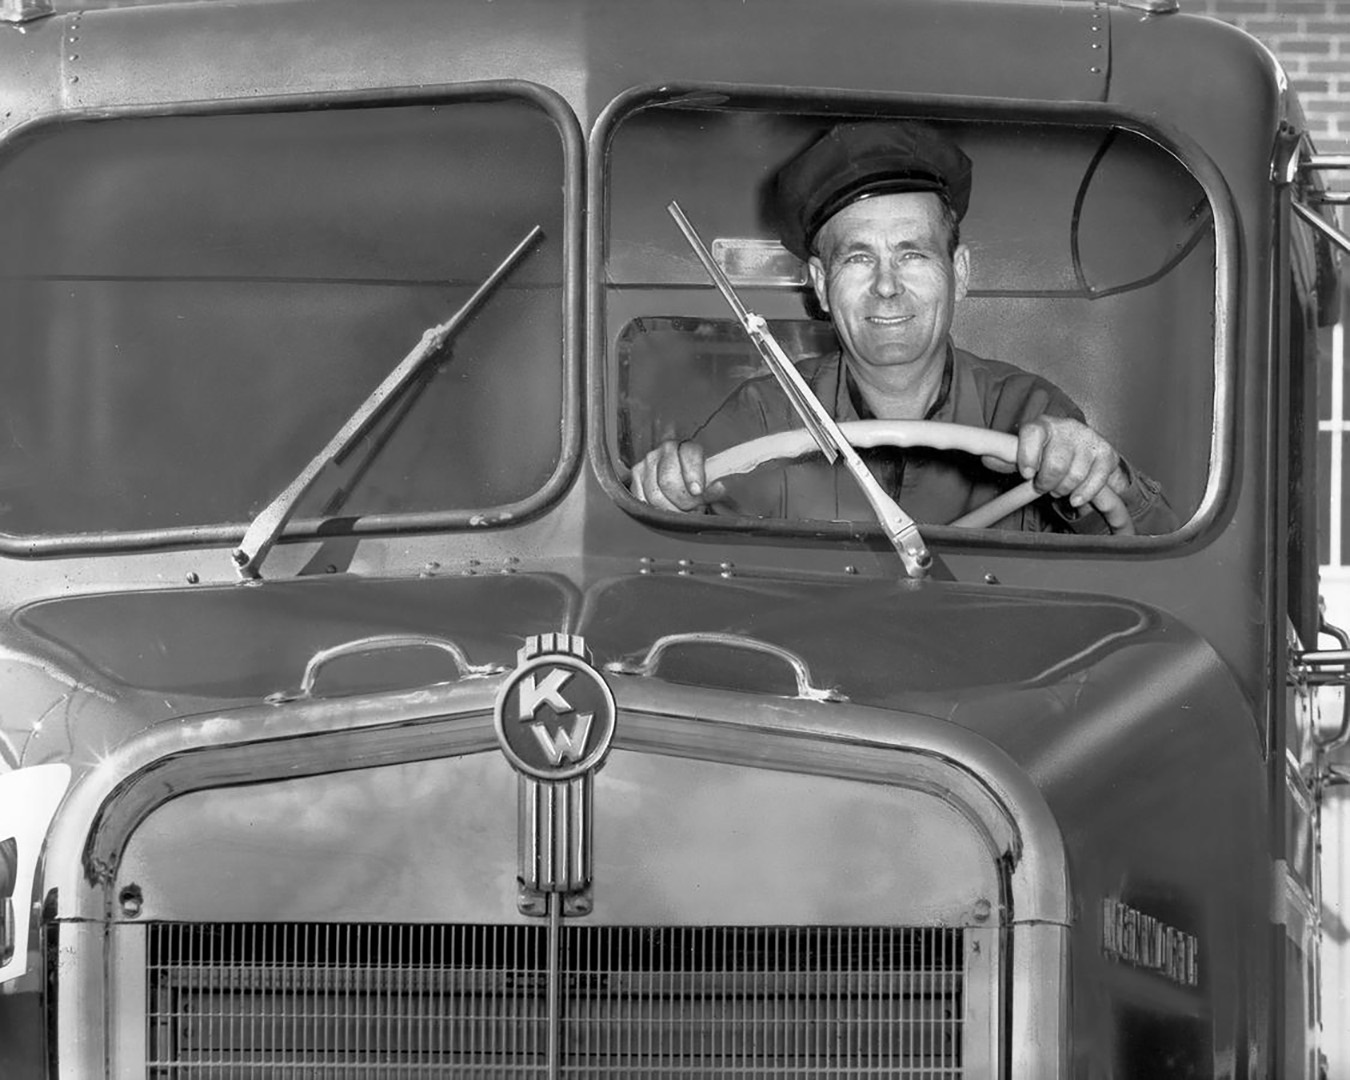 Kenworth truck and driver 1961